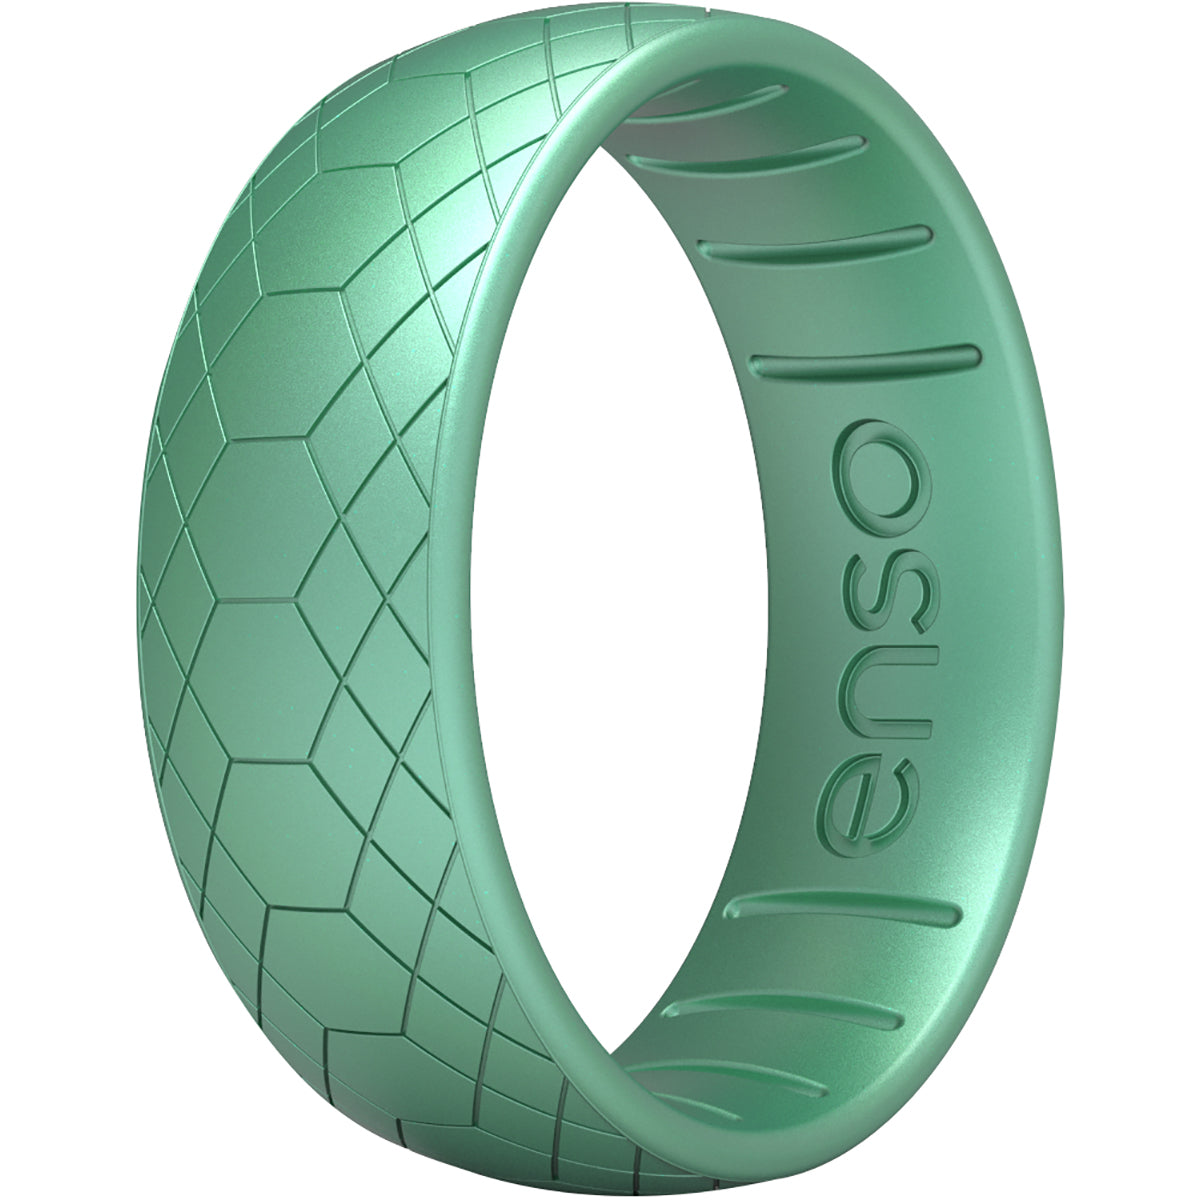 Enso Rings Classic Etched Legends Series Silicone Ring - 9 - Medusa Snake Enso Rings